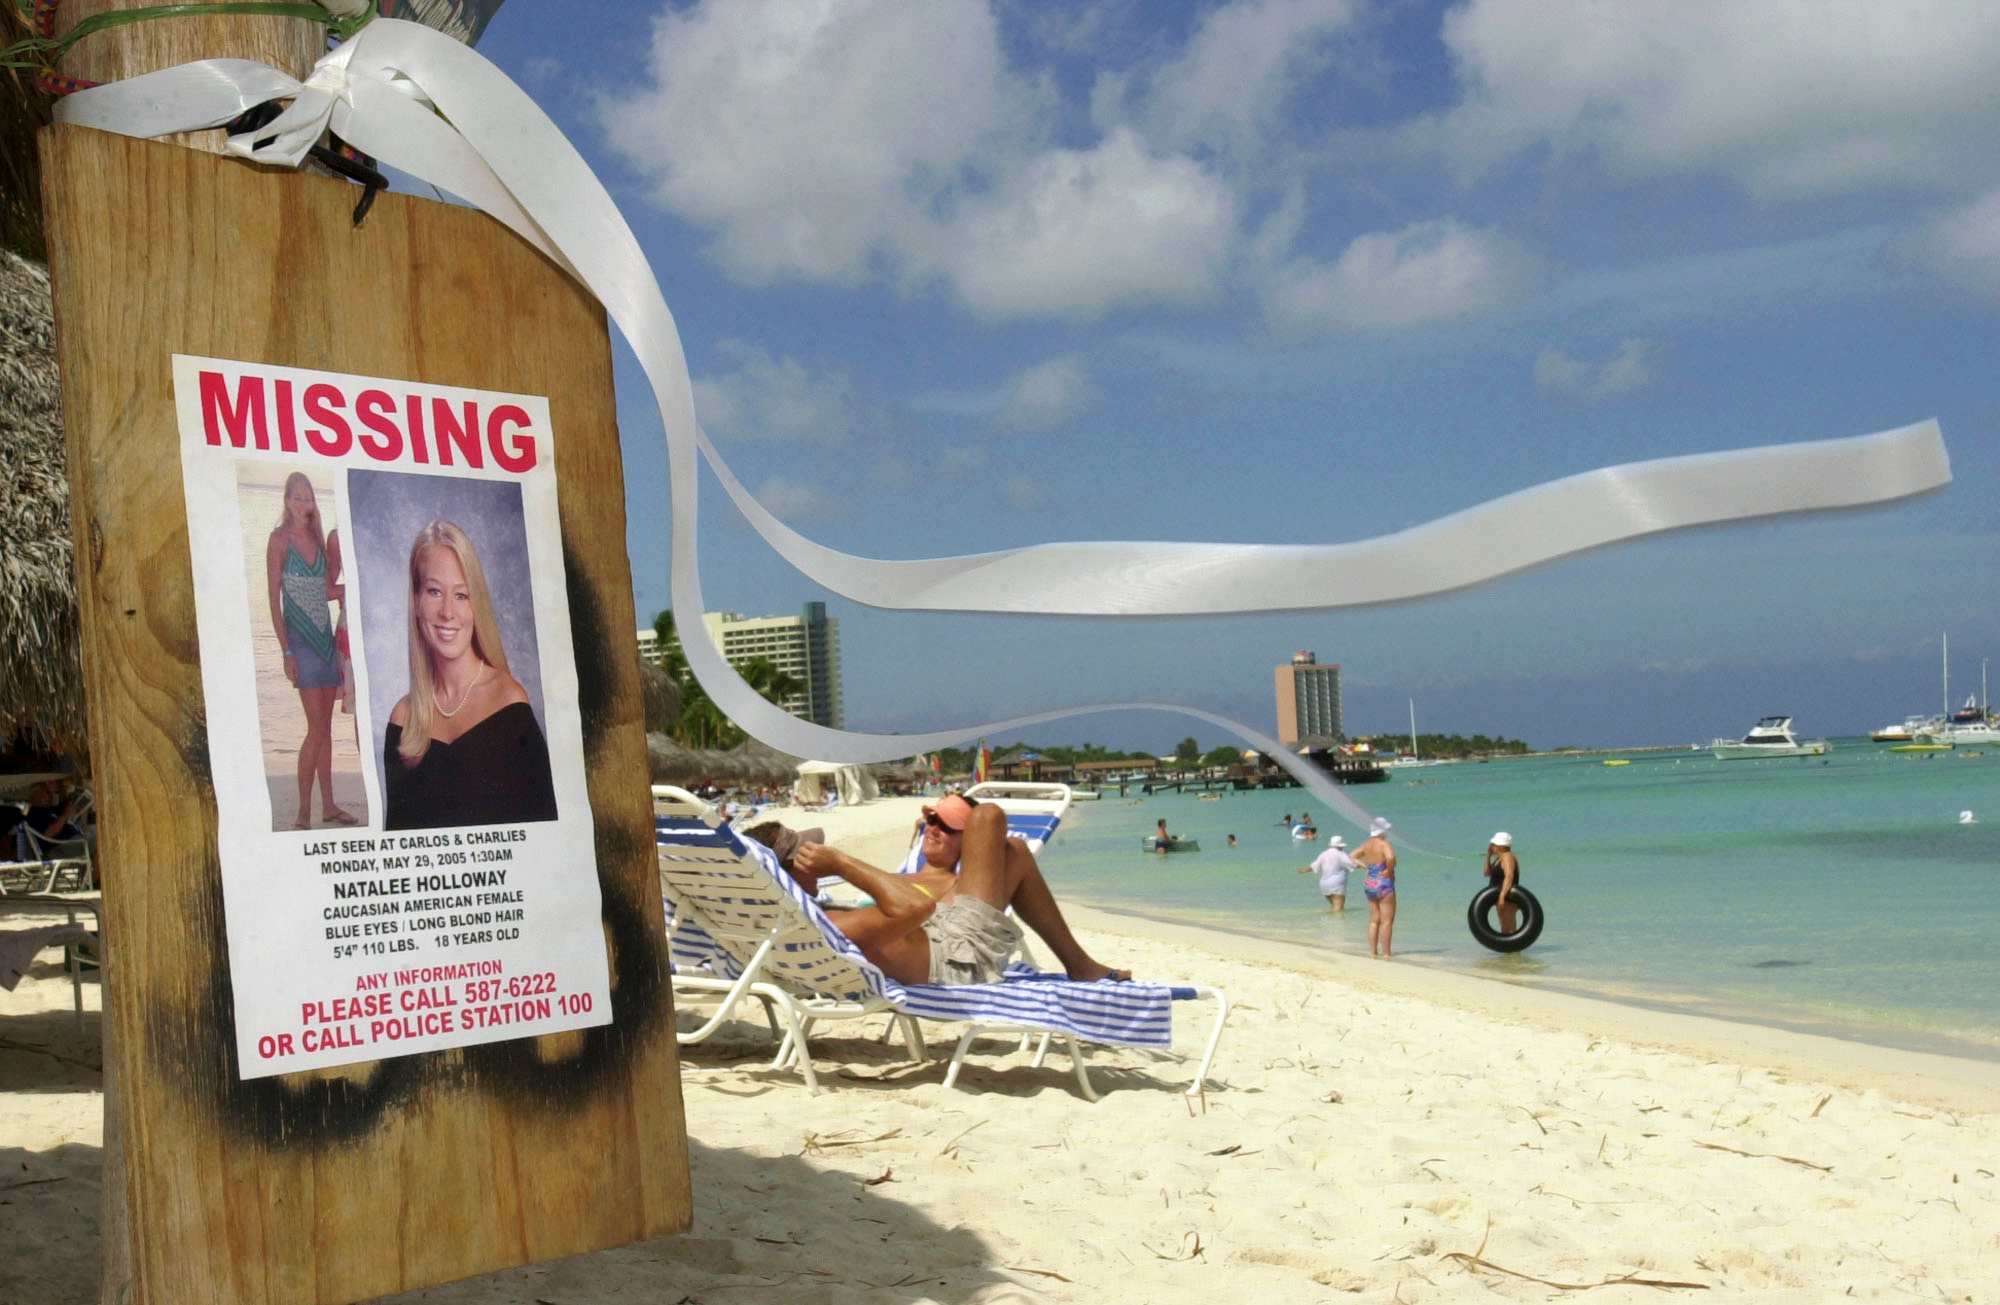 PHOTO: This June 10, 2005 file photo shows a missing poster for Natalee Holloway, a high school graduate of Mountain Brook, Ala., who disappeared while on a graduation trip to Aruba on May 30, 2005.